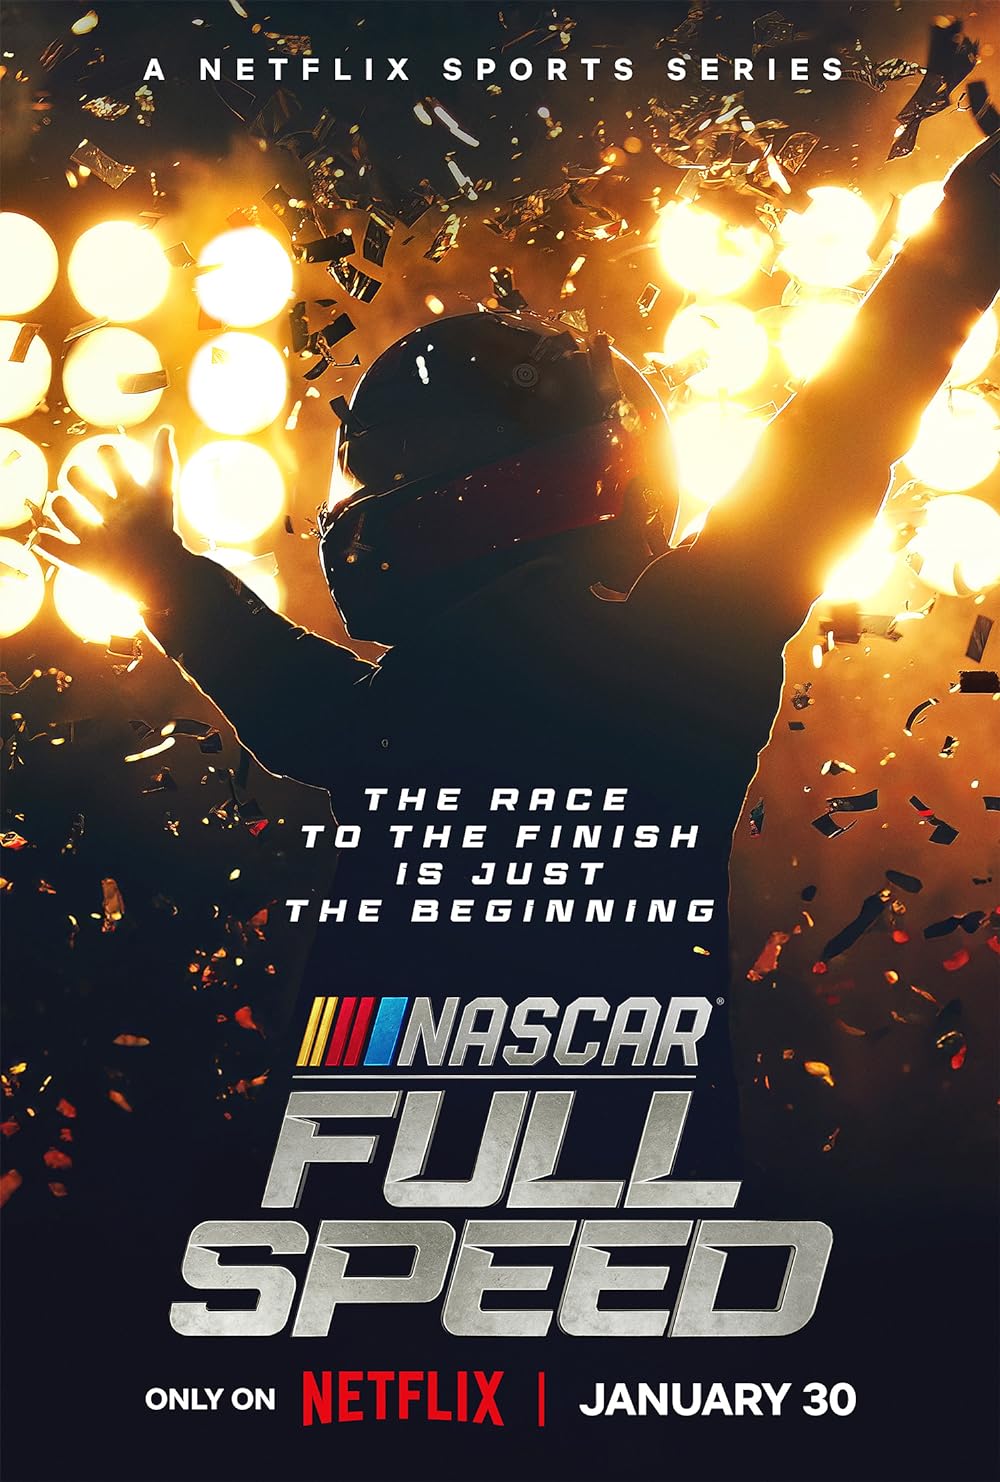 Nascar: Full Speed (January 30) - Streaming on NetflixNascar: Full Speed is a captivating documentary series diving into the intense world of the 2023 NASCAR Cup Series Playoffs. It provides an unprecedented glimpse at the high stakes and high speeds of one of motorsports’ most prestigious events. The series follows drivers like Ryan Blaney, William Byron, Denny Hamlin, and Tyler Reddick, offering an inside look at their professional challenges on the racetrack and their personal journeys off it.